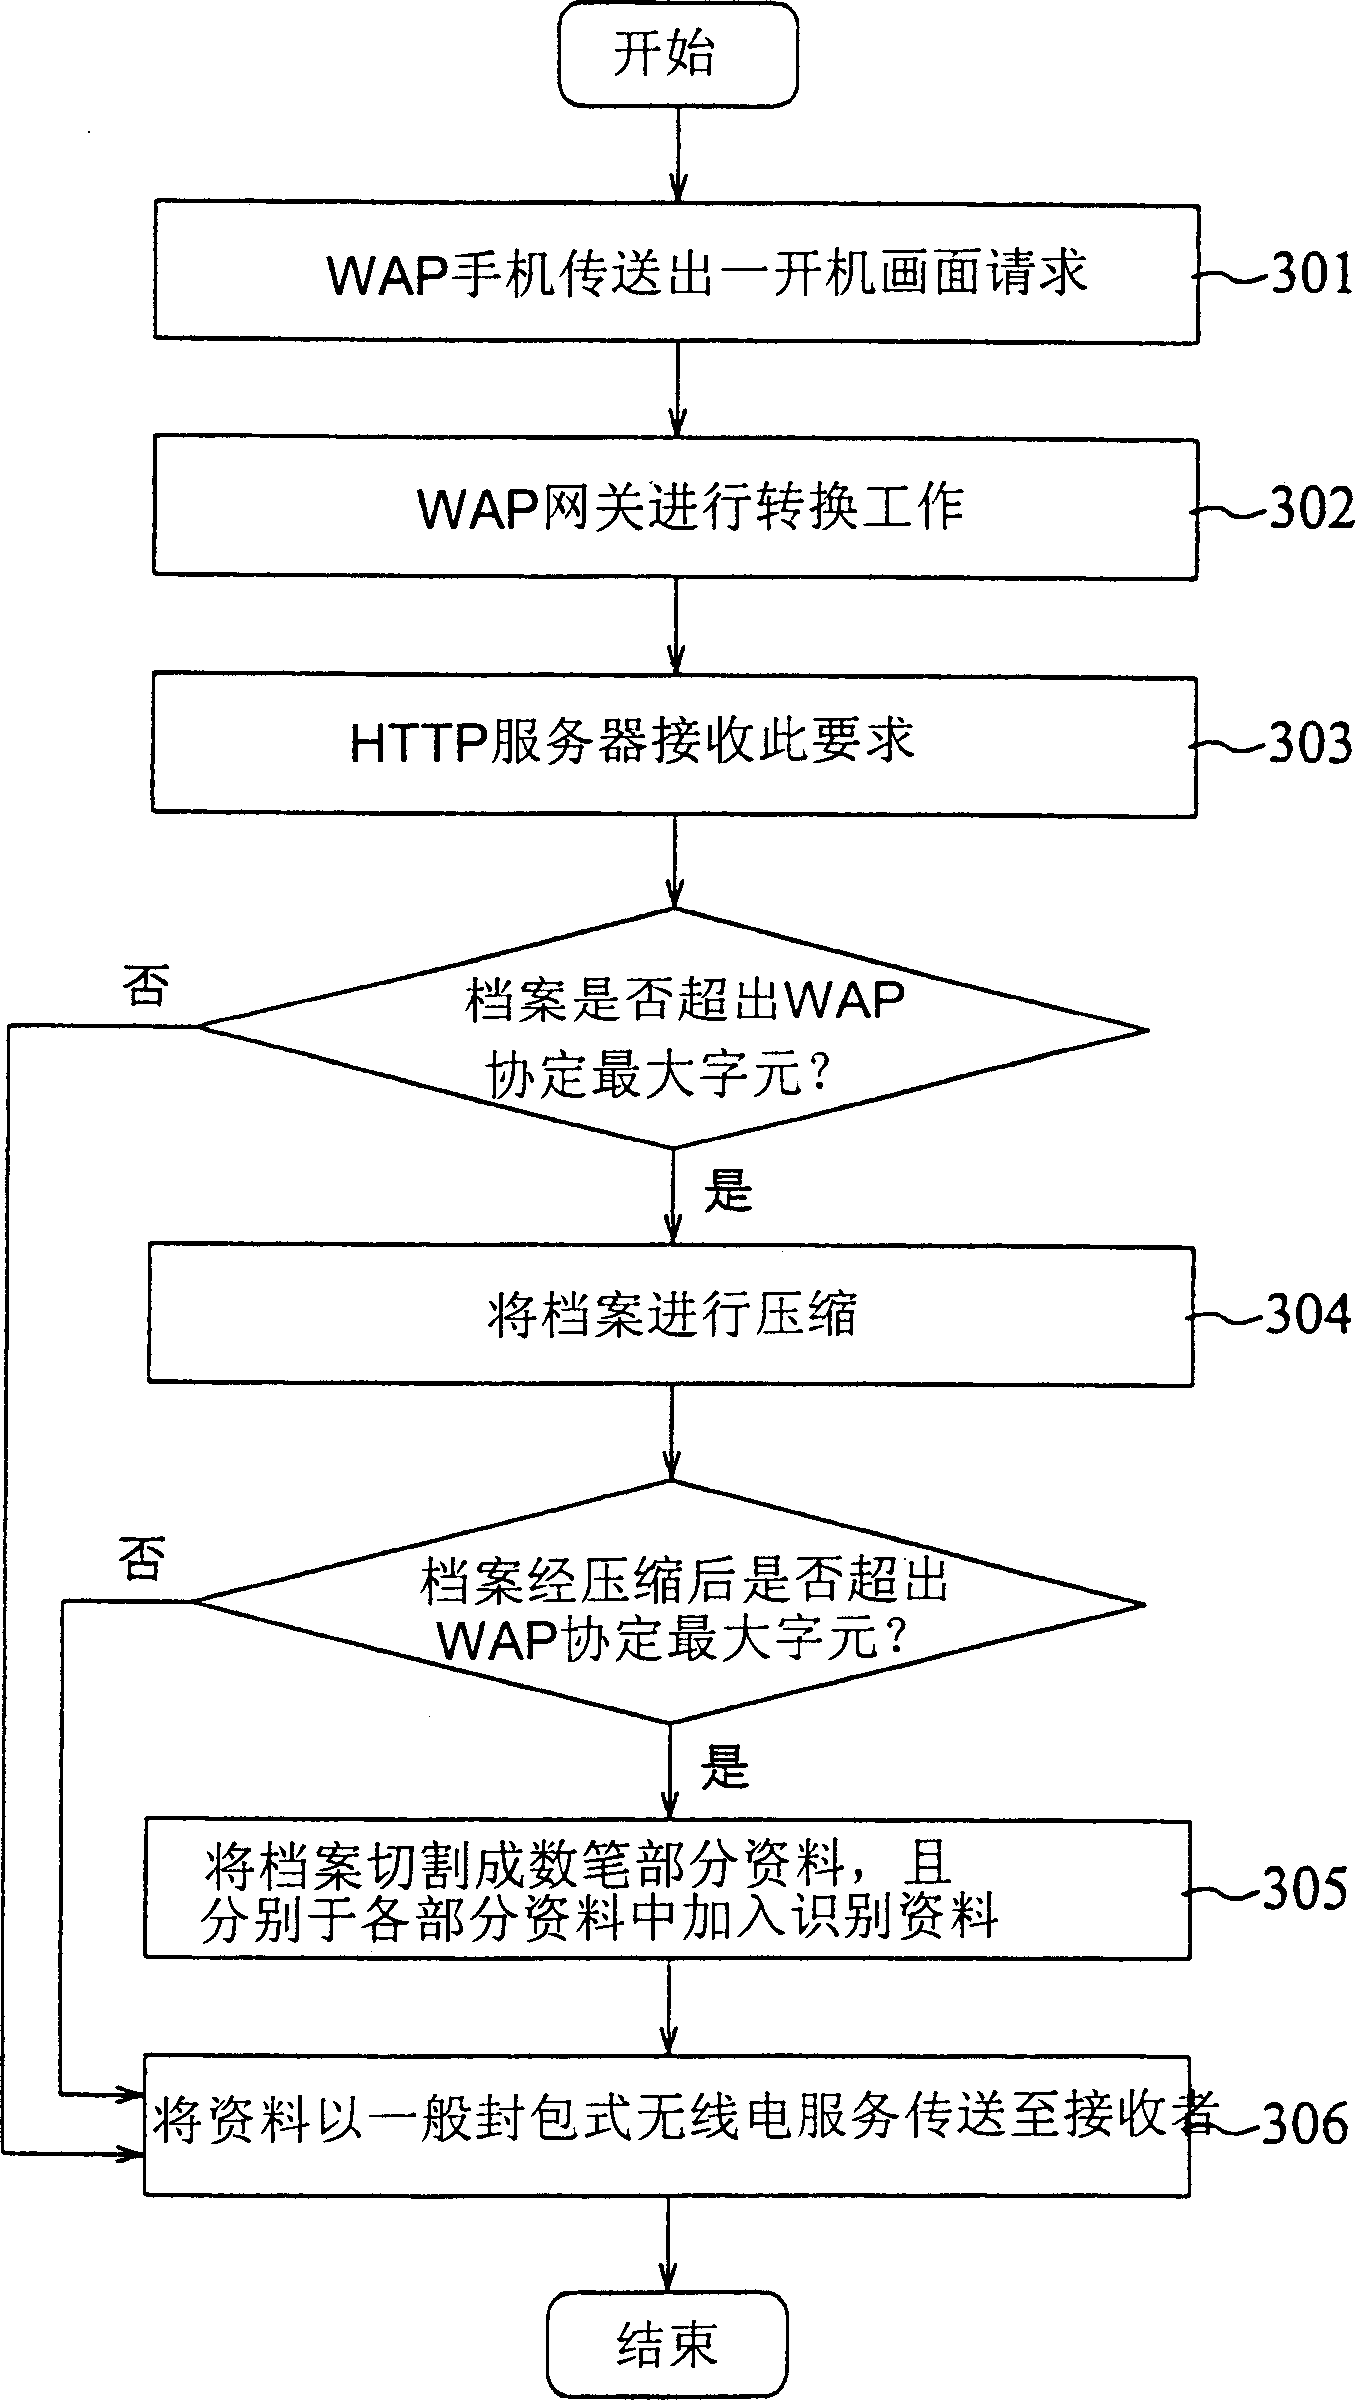 System and method of processing mobile communication device data under radio application agreement